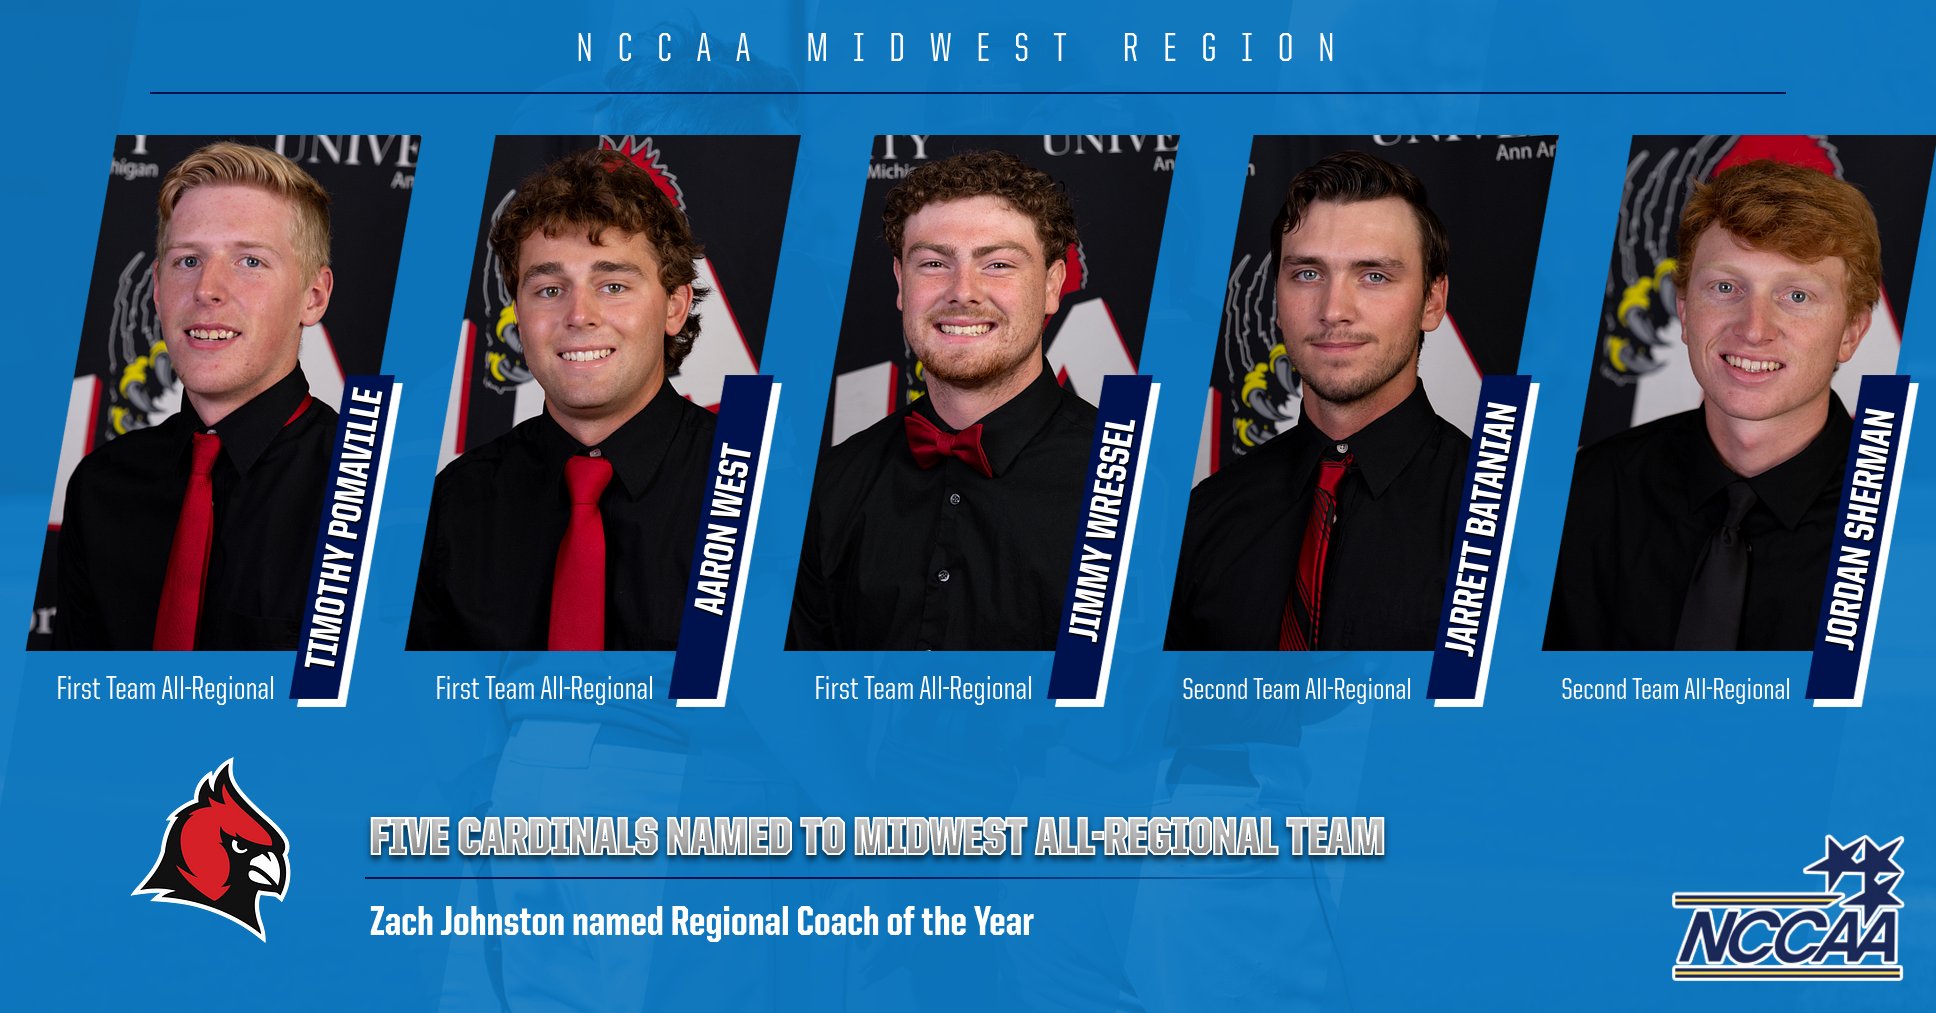 Five Cardinals named to NCCAA Regional Team; Johnston named Regional Coach of the Year